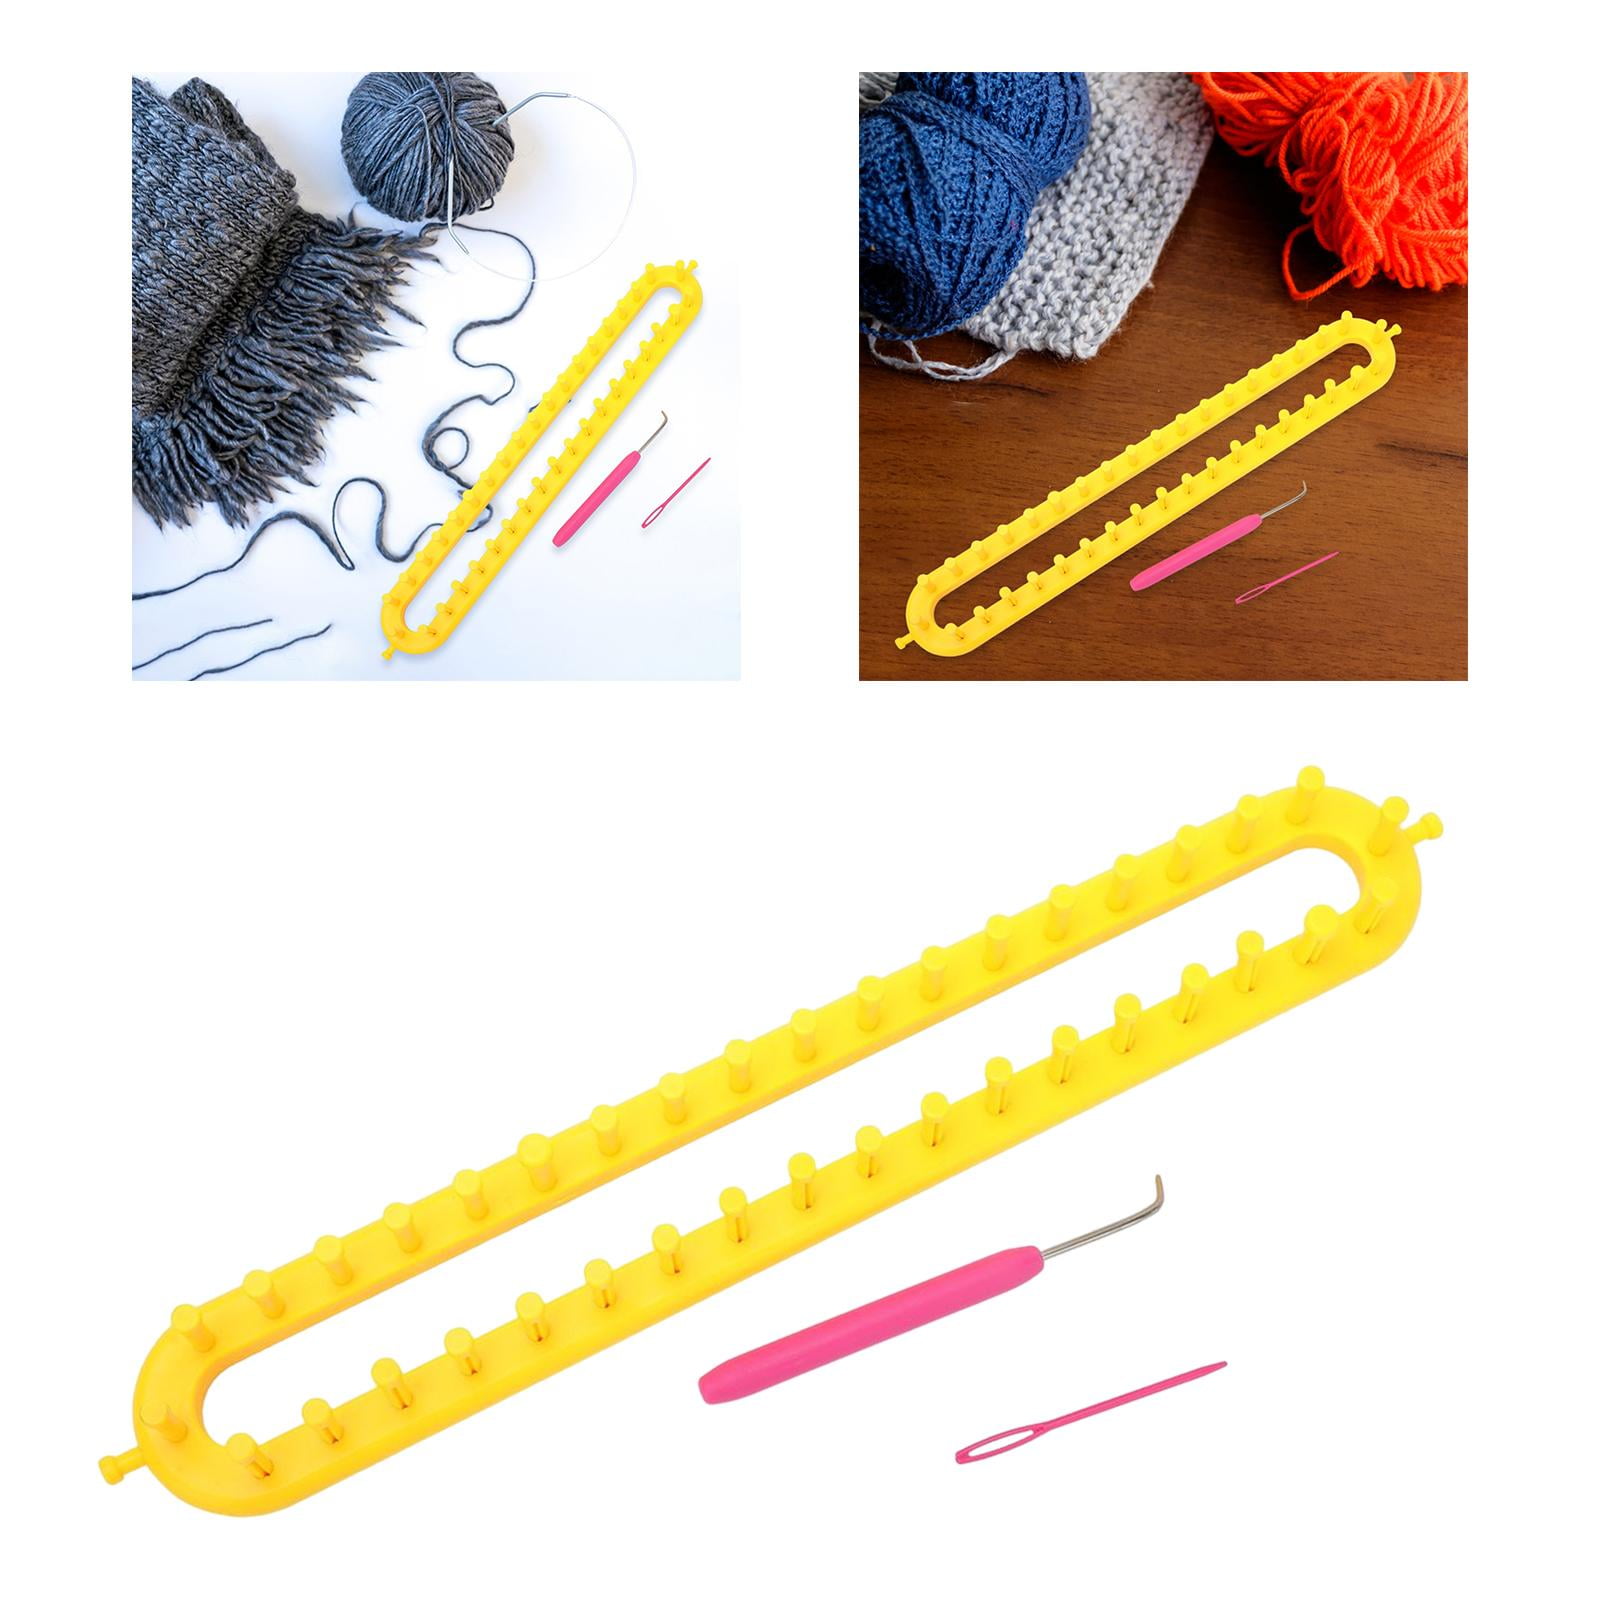 DEFNES Knitting Loom Kit, DIY Craft Knitting Board Looms with Loom Pick  Tool and Needle, Durable & Safe, Creativity for Kids Small Knitting Loom  Kit 